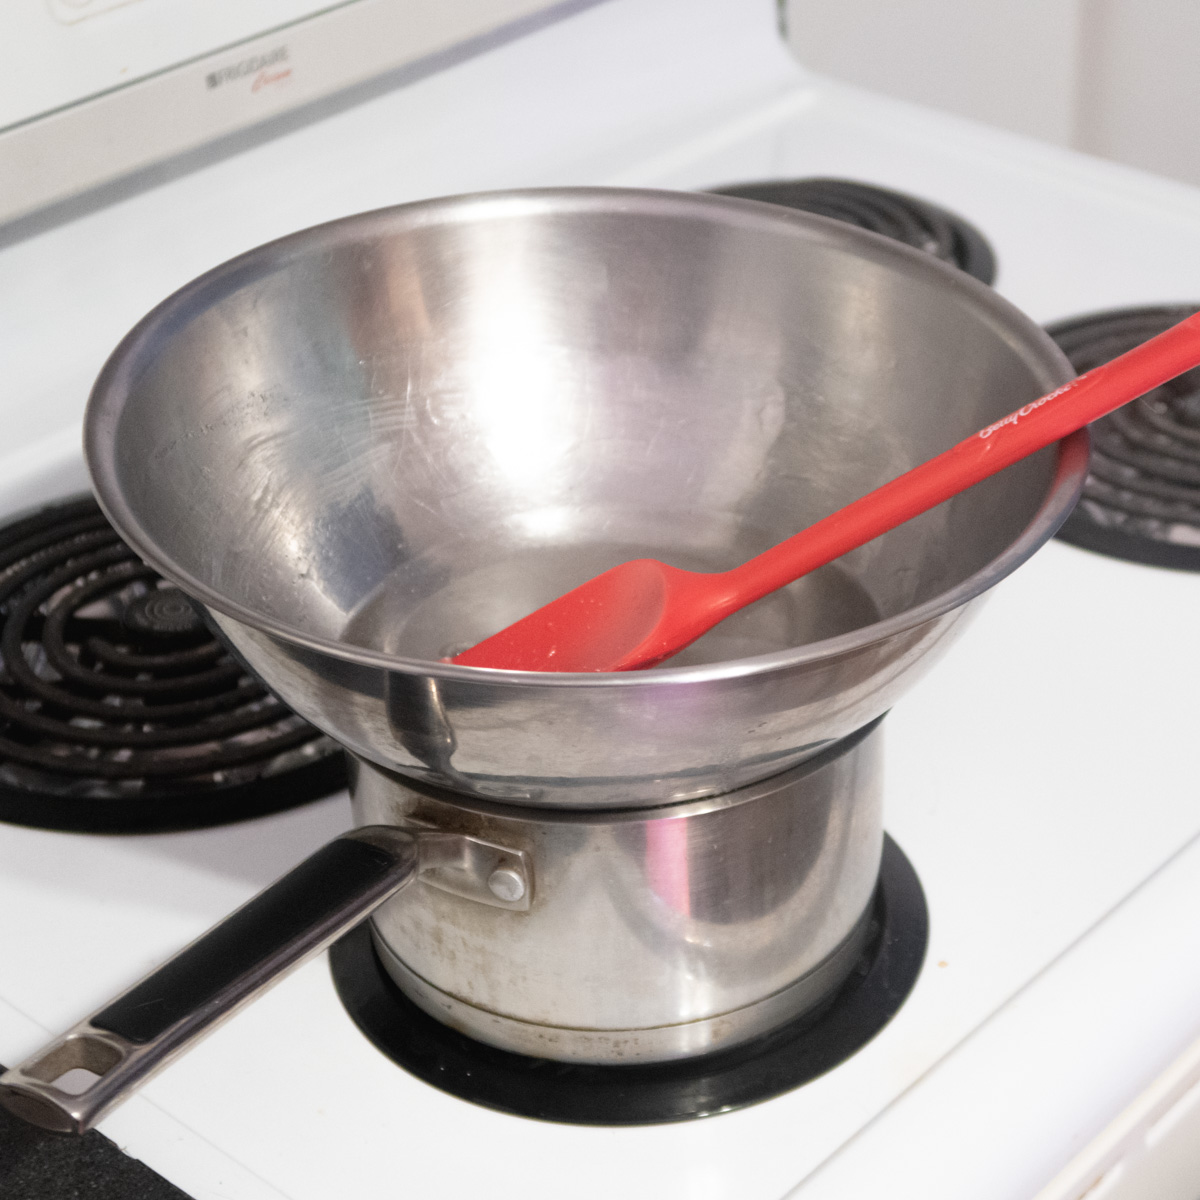 A large bowl is placed over a small saucepan to make a double boiler.